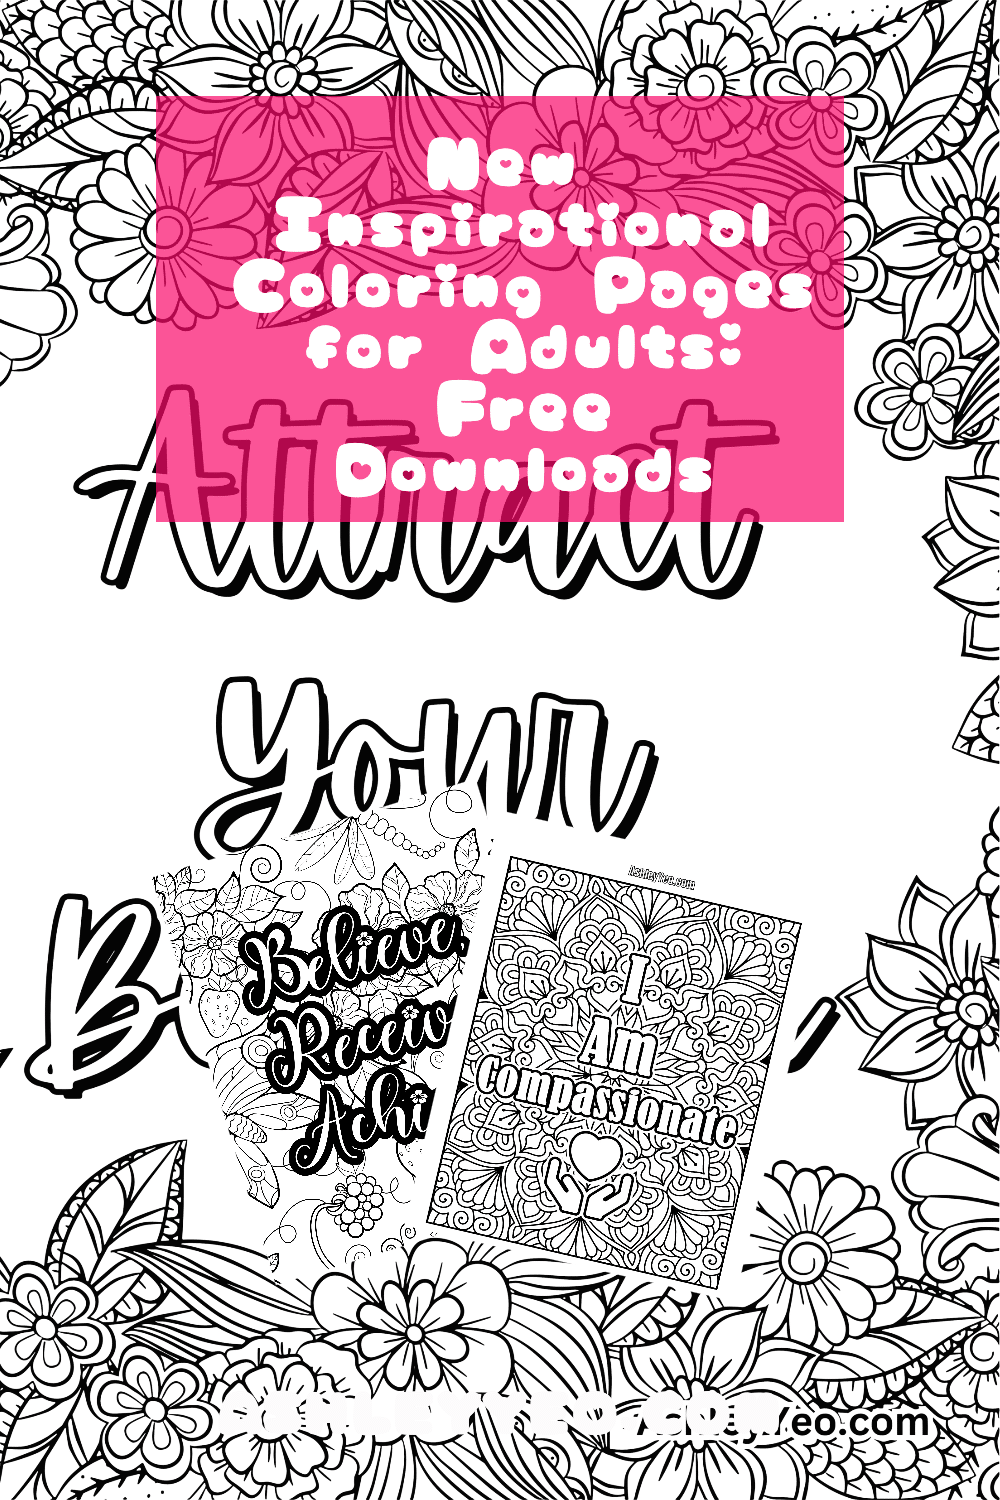 New Inspirational Coloring Pages for Adults: Free Downloads